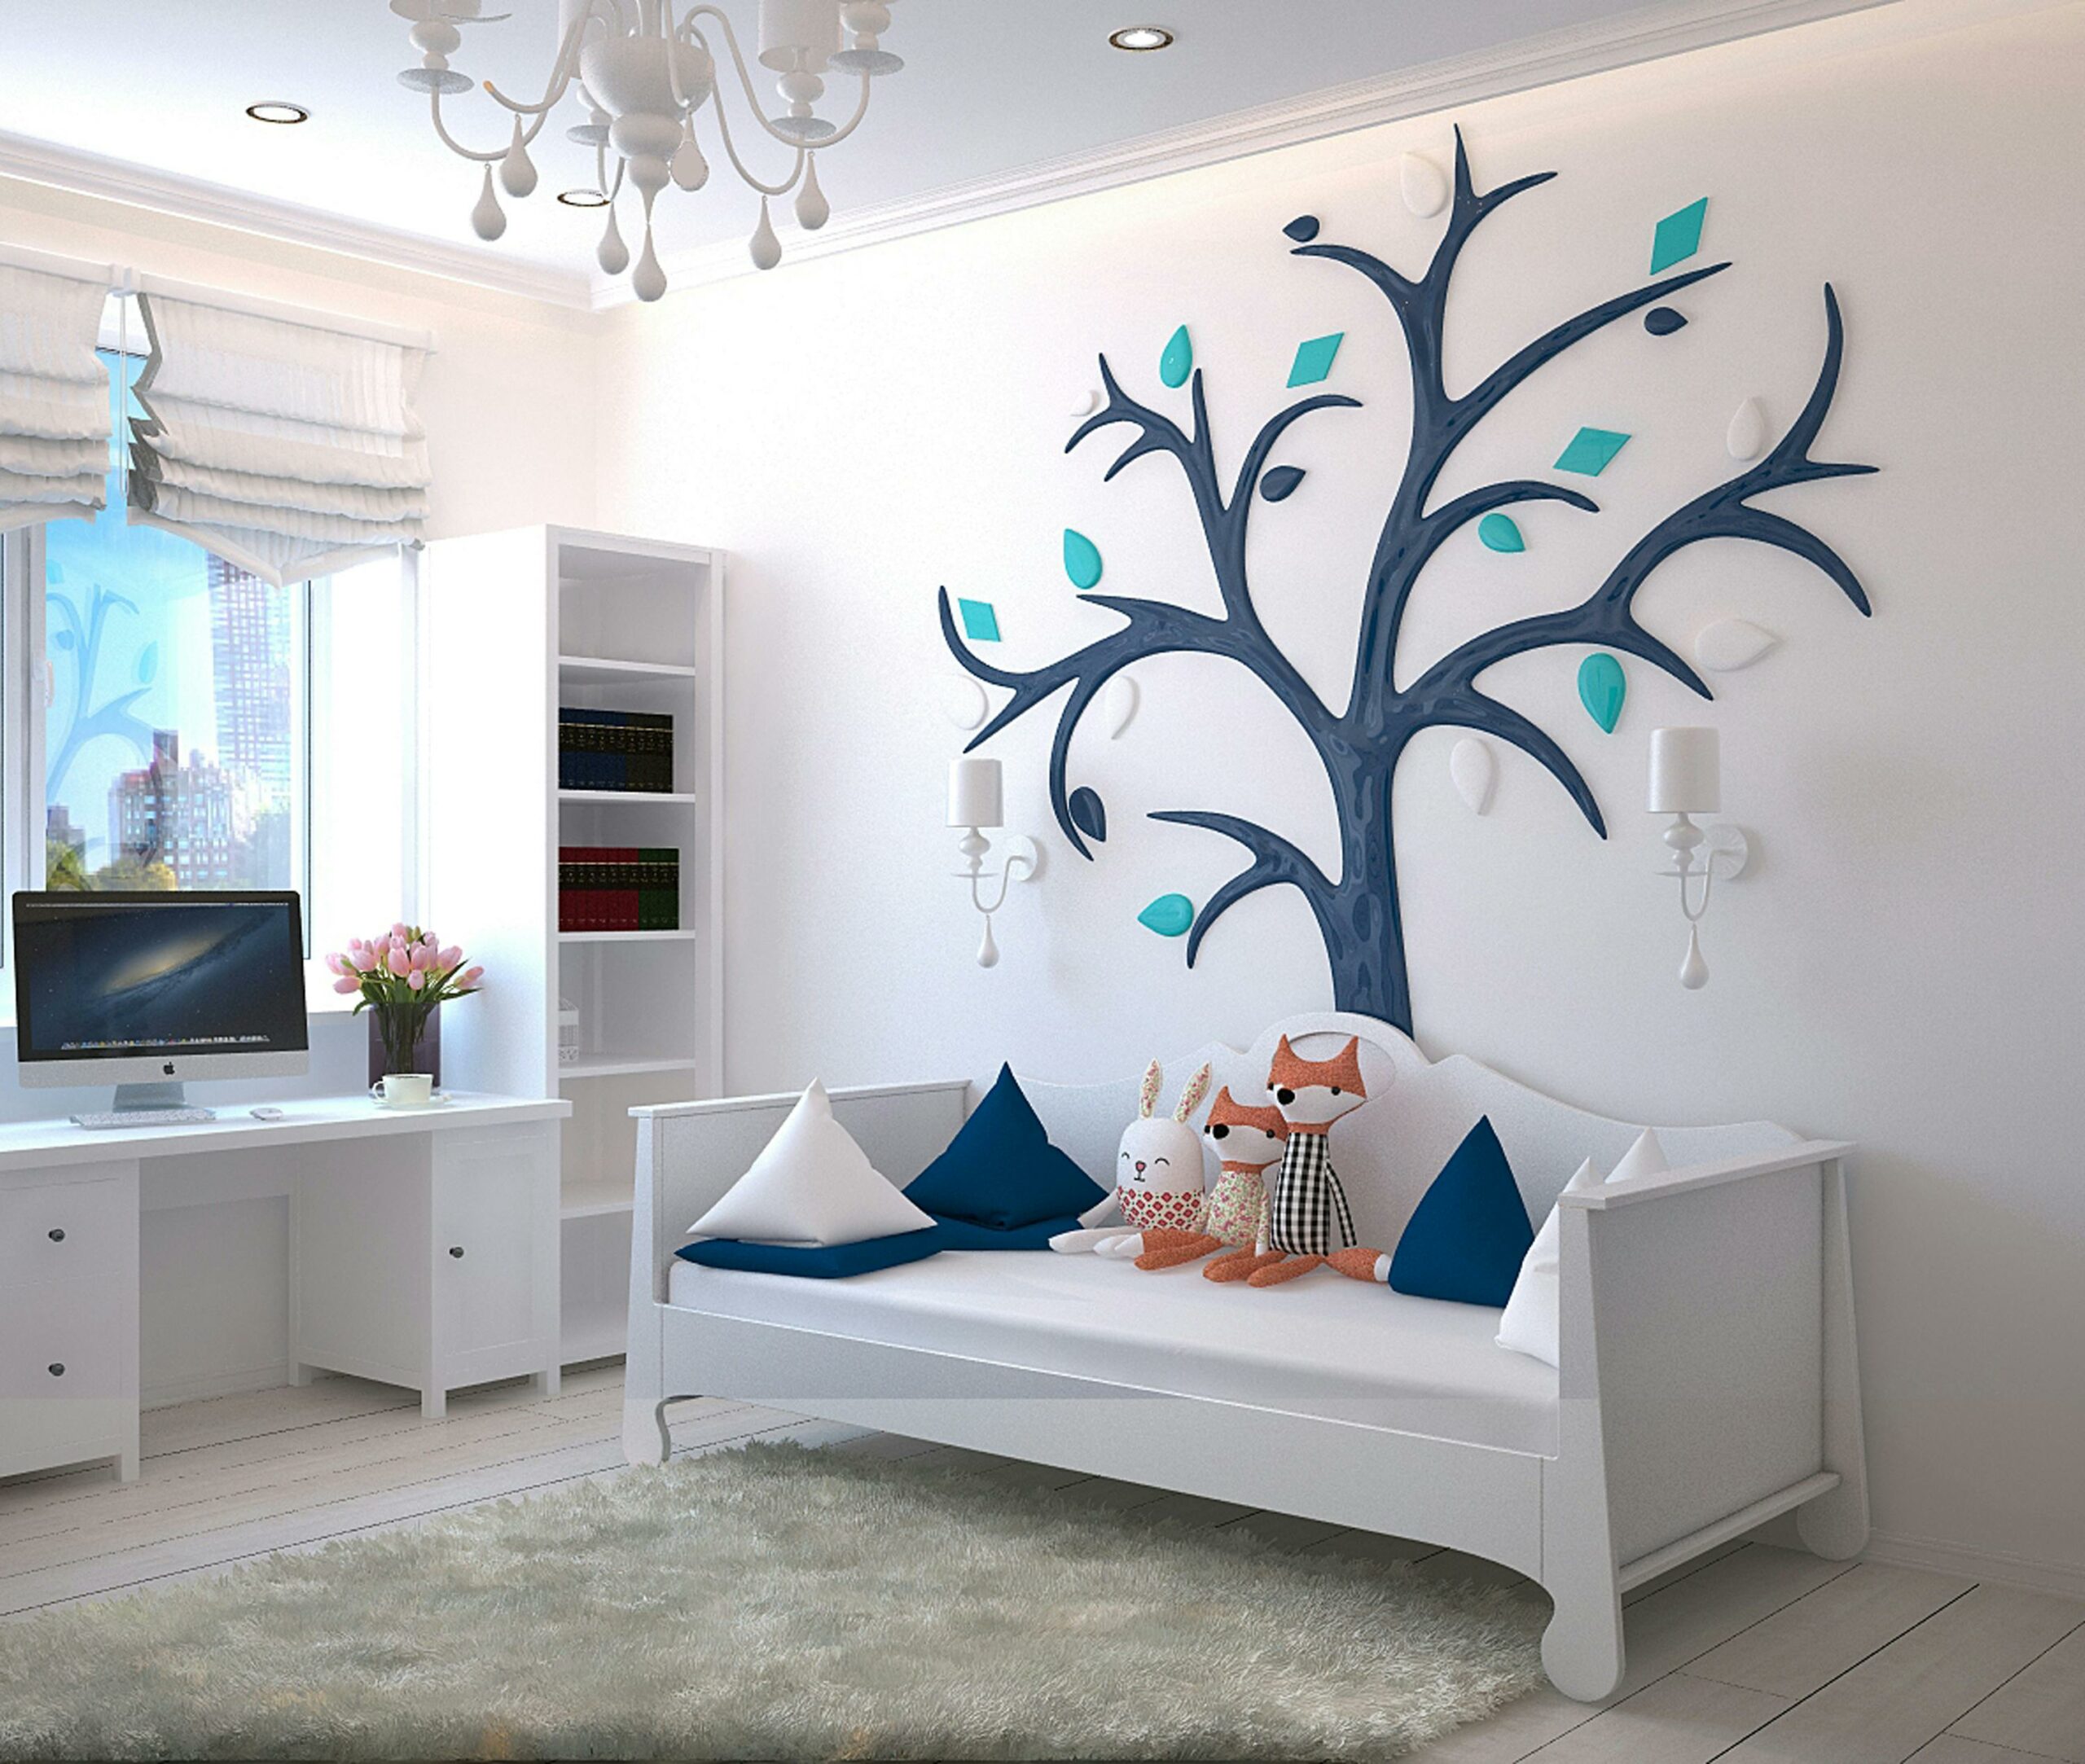 Wall Decor Possibilities for Kids' Room